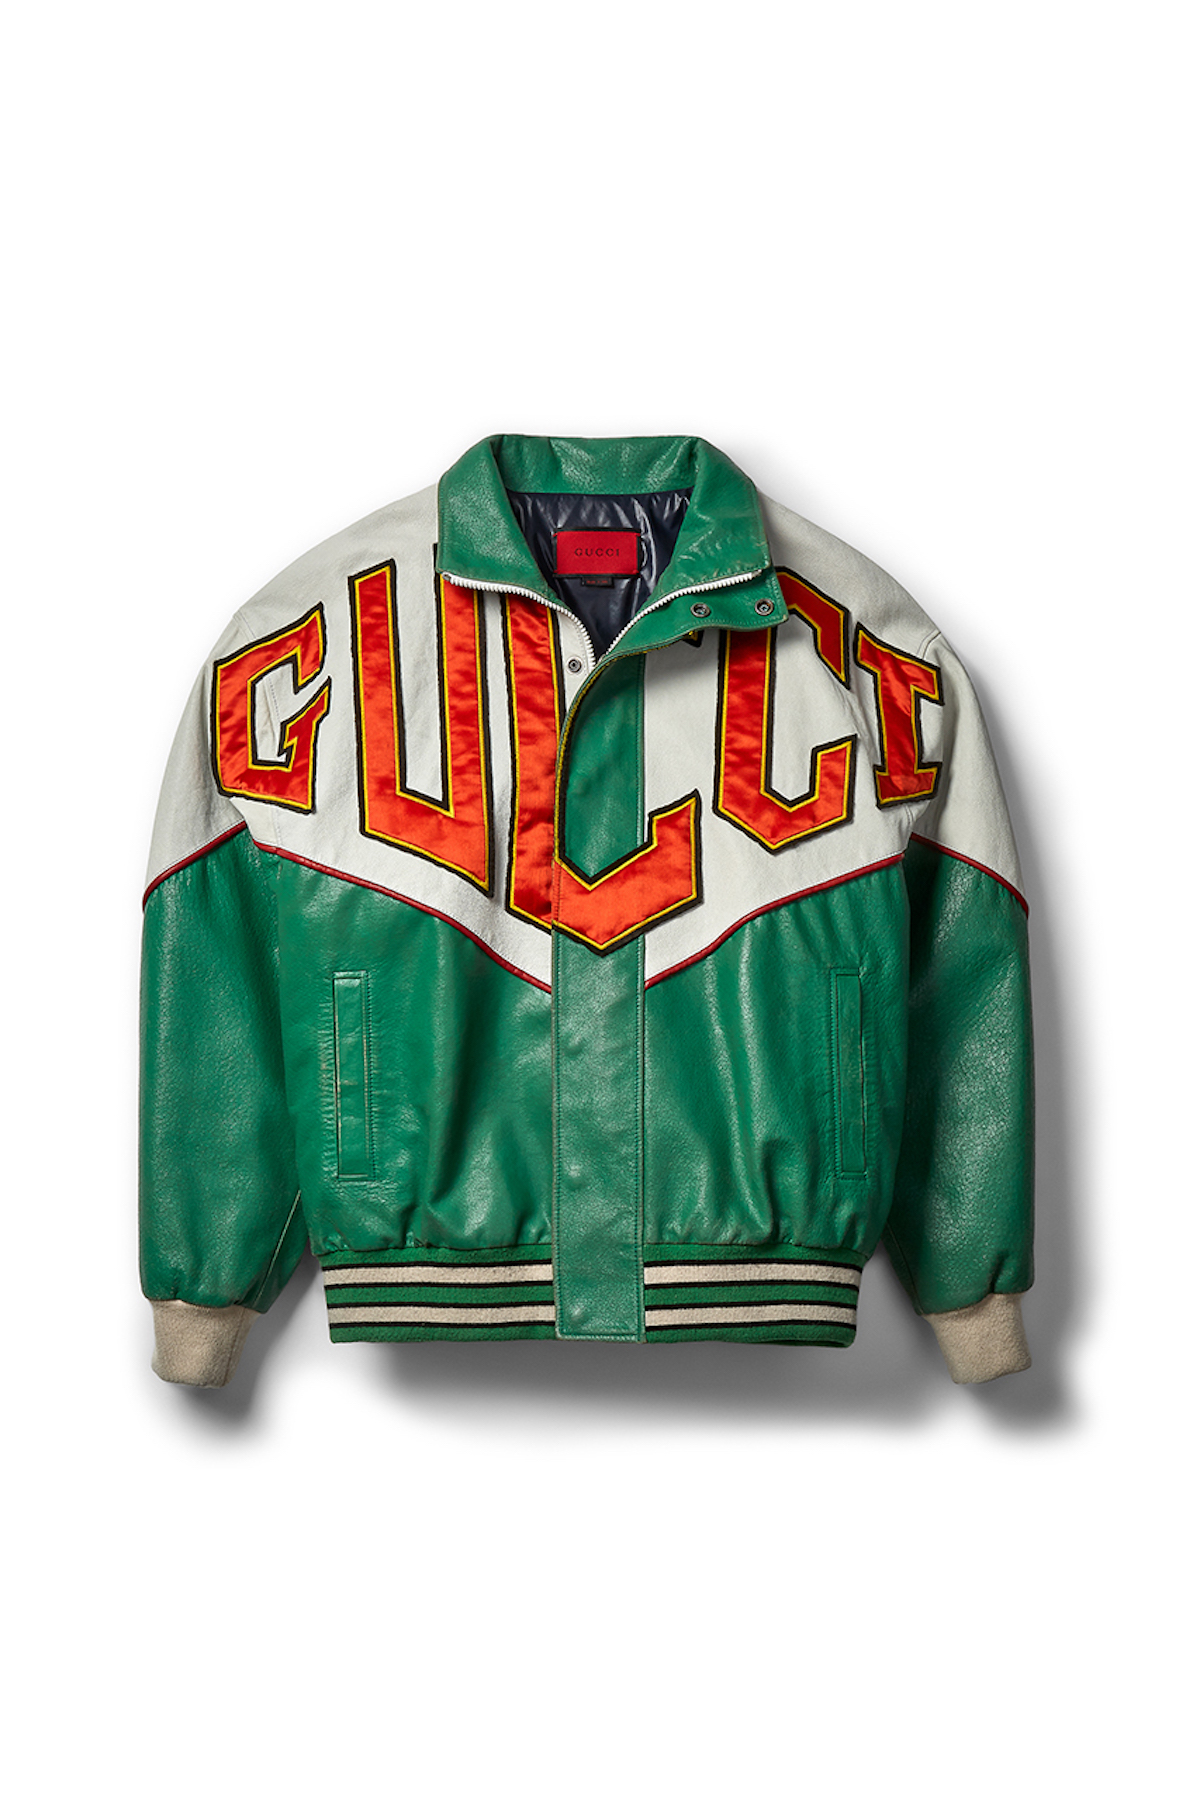 Gucci & Dovers Street Market Unveil Collaborative AW19 Collection